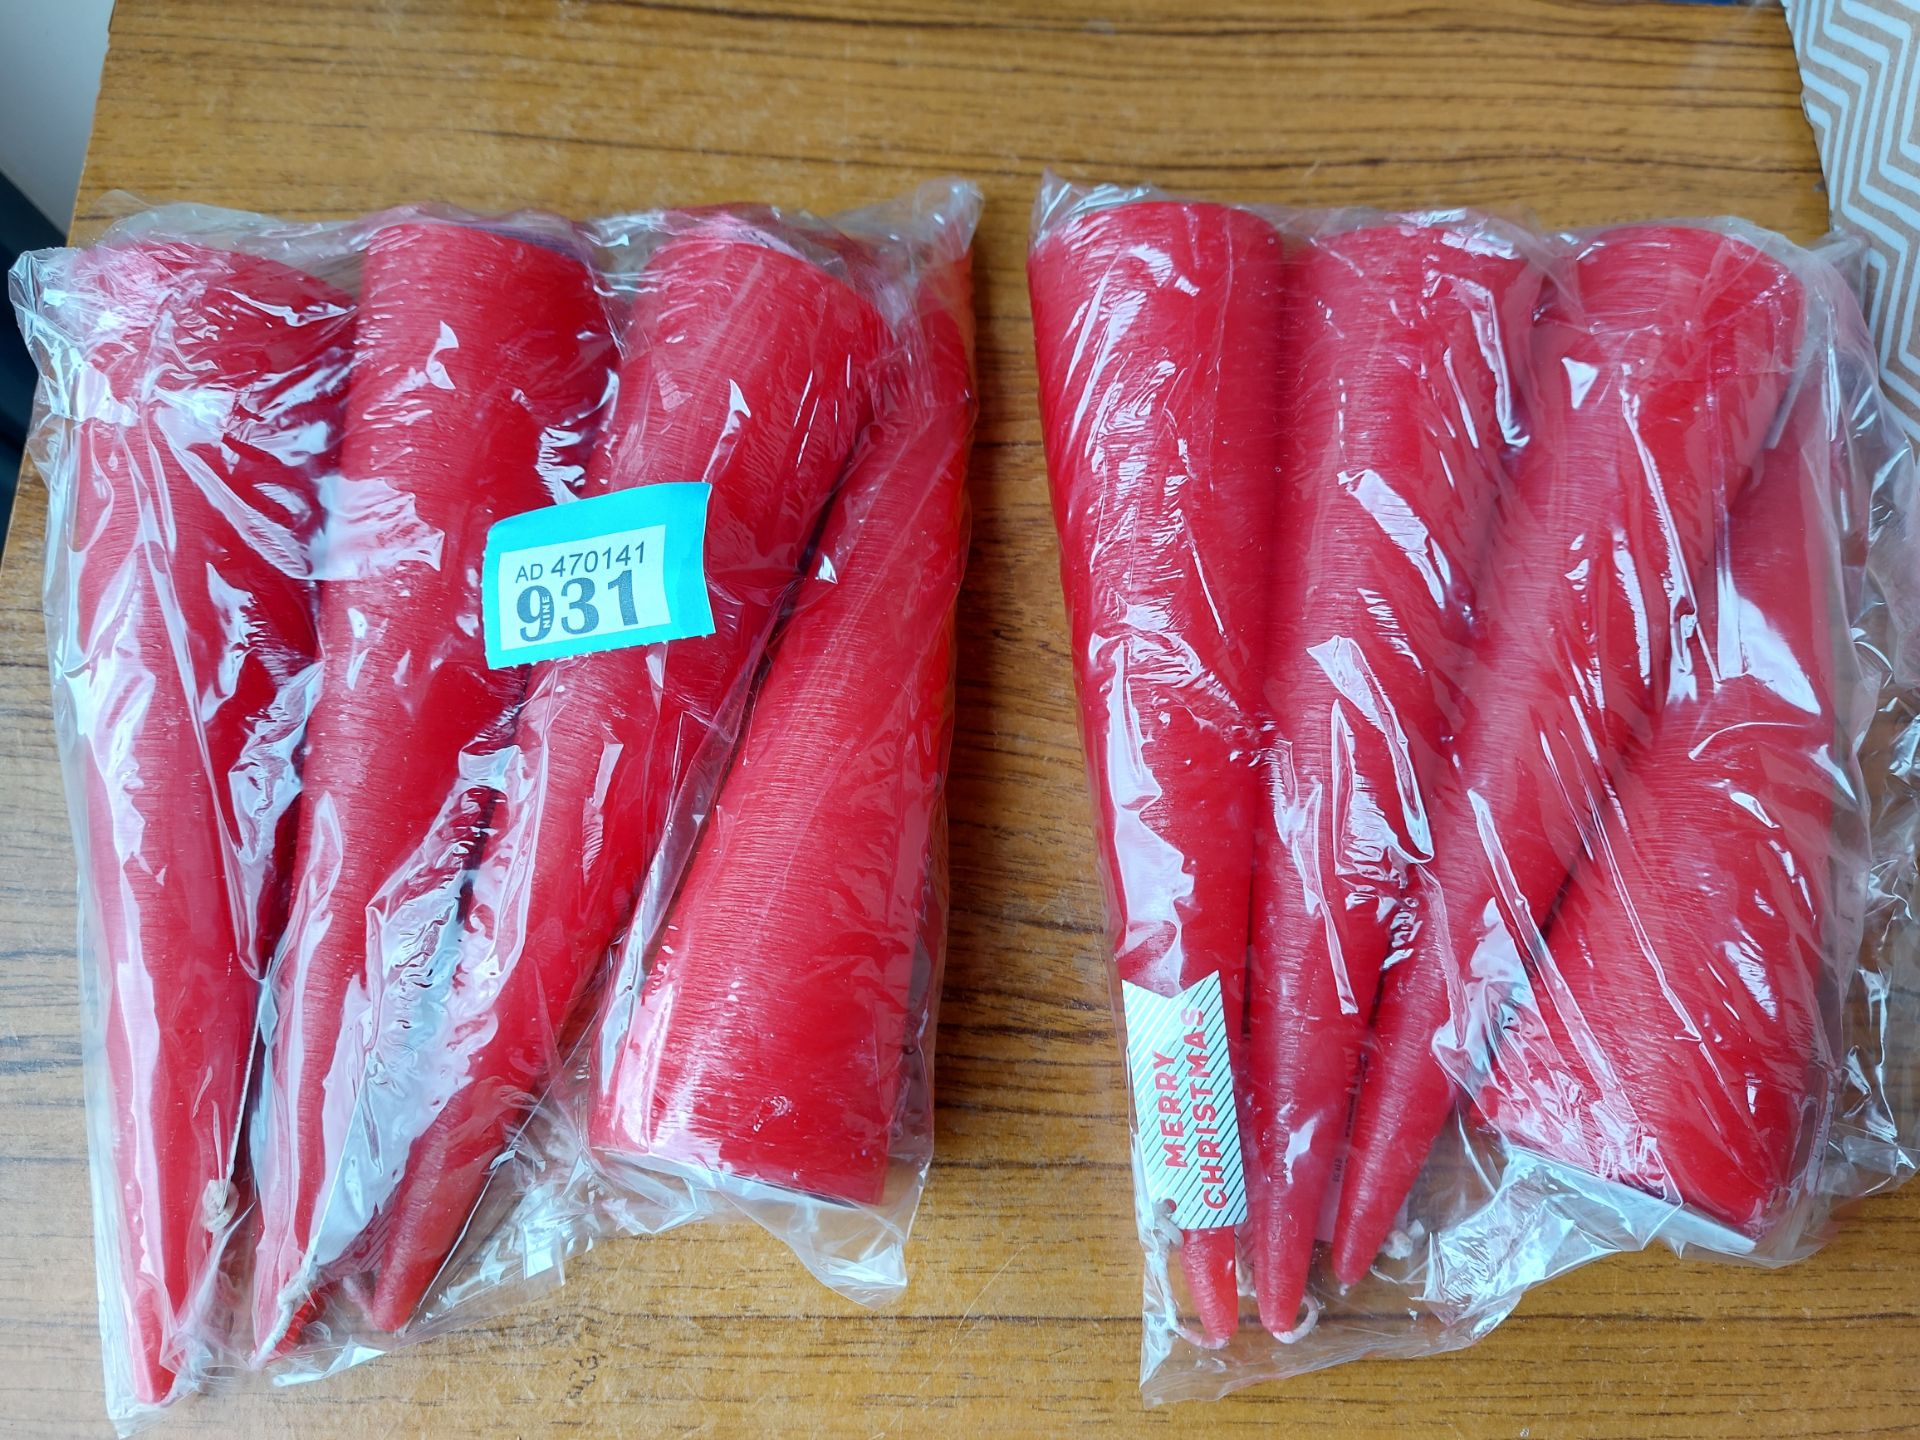 Red Conical Candles from Paperchase. Approx. 10 Inches Long. 2 Inches Wide At Base. Box of 8 Rr...